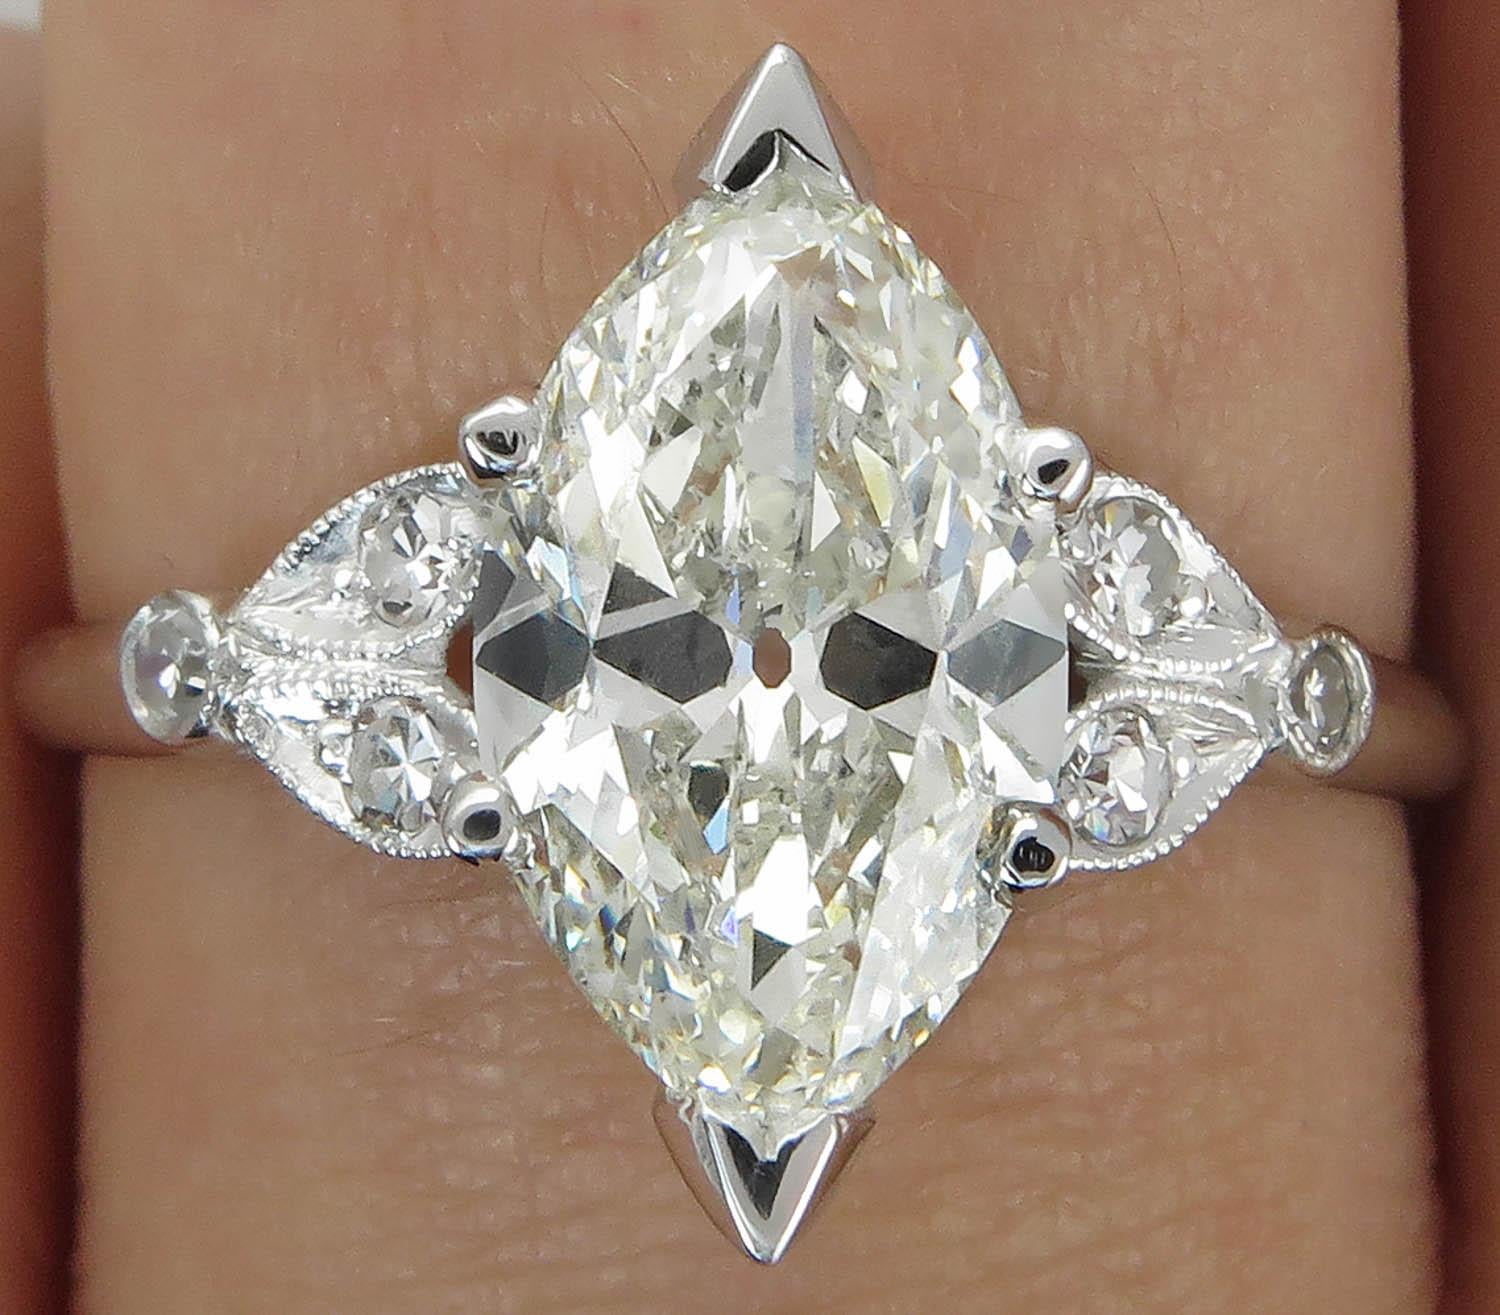 A Timeless Elegant Authentic Art Deco CIRCA 1930s Engagement Ring with EGL USA Certified 2.09ct Old European Marquise Center Diamond in J-K color SI2 clarity (Eye Clean).
It is set into Gorgeous Unique Mounting Platinum (stamped) and accented with 6